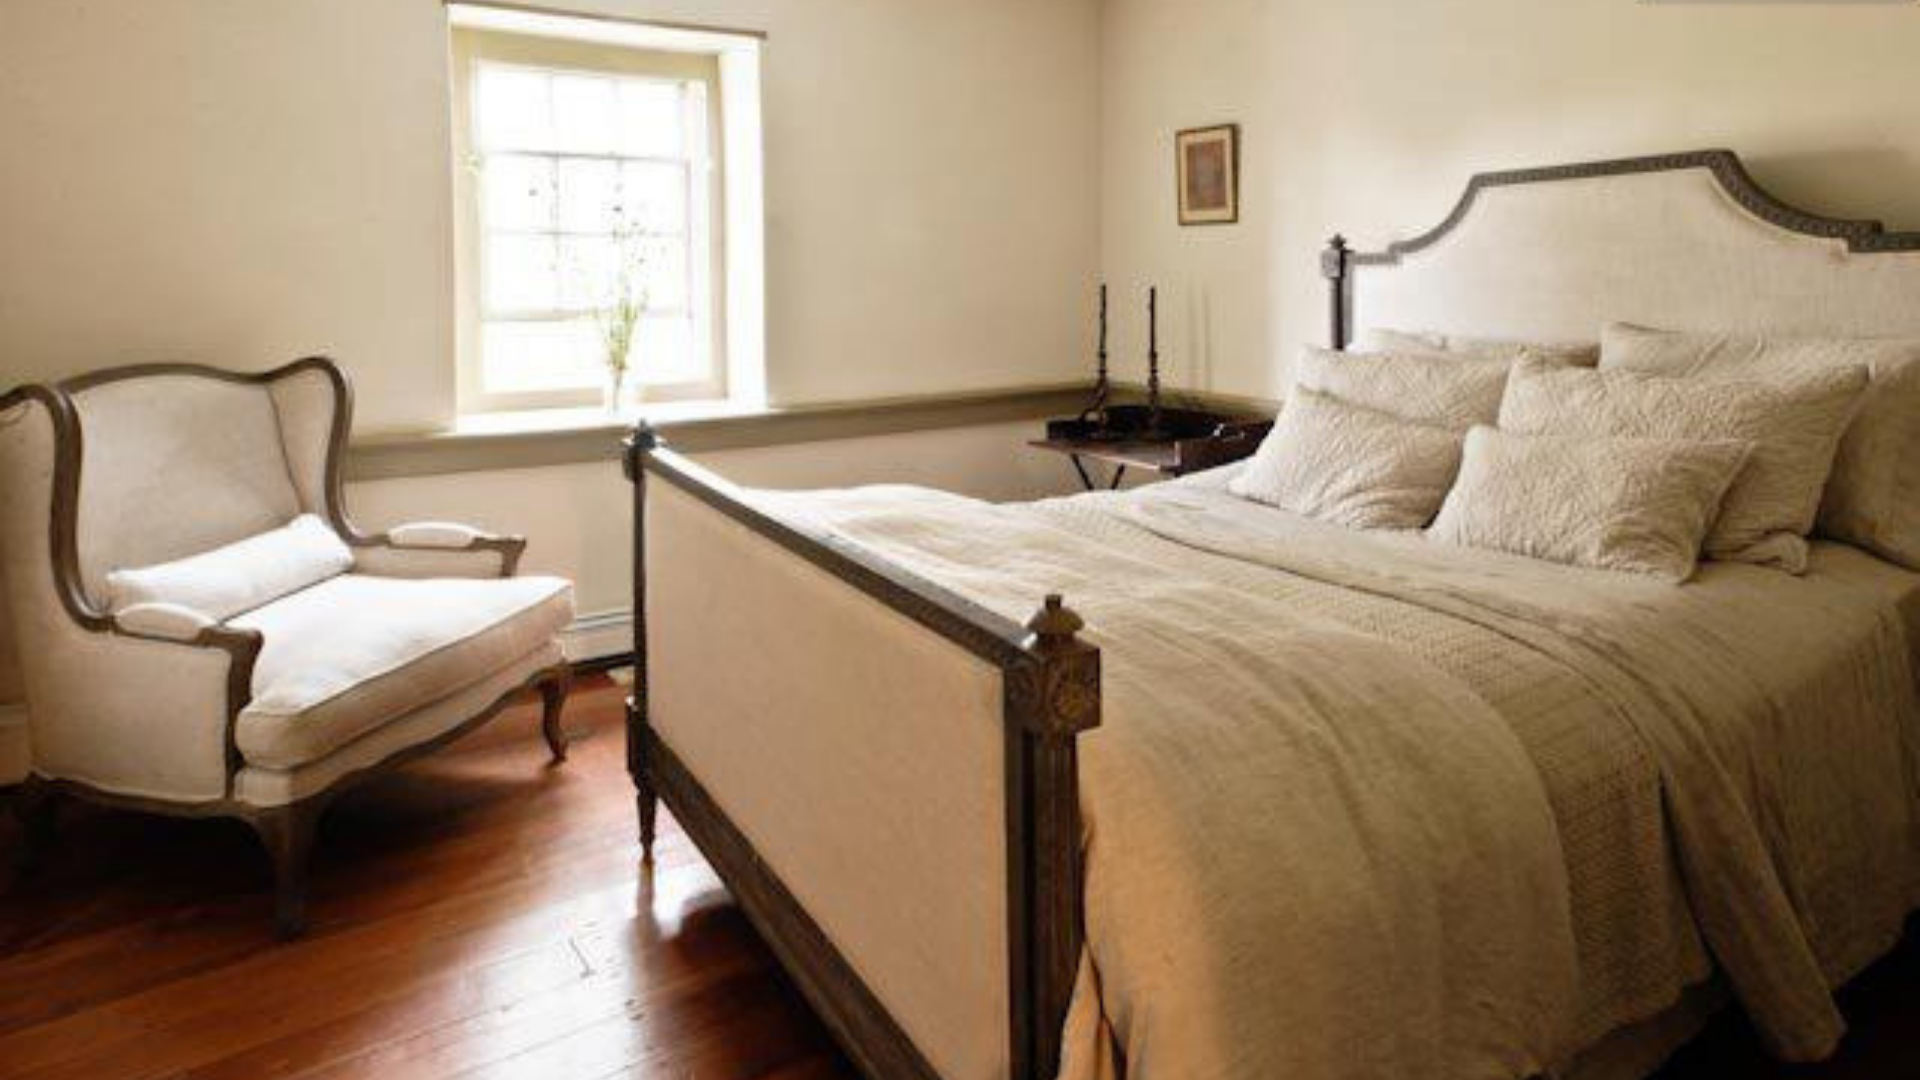 OldestStone Farm Guest Room